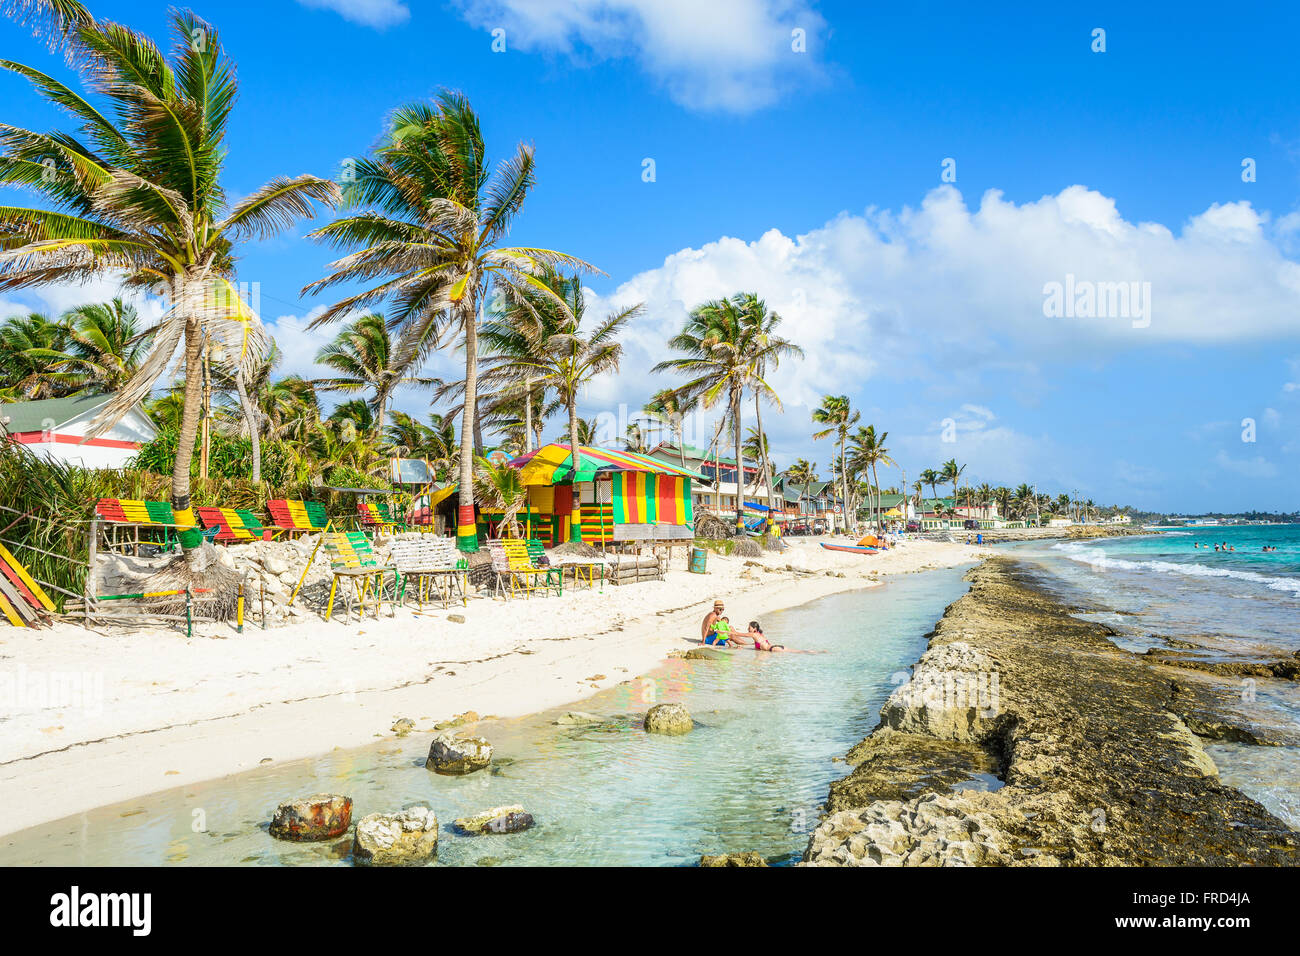 Sunny day at the beach in the island of San Andrés, Colombia, Stock Photo